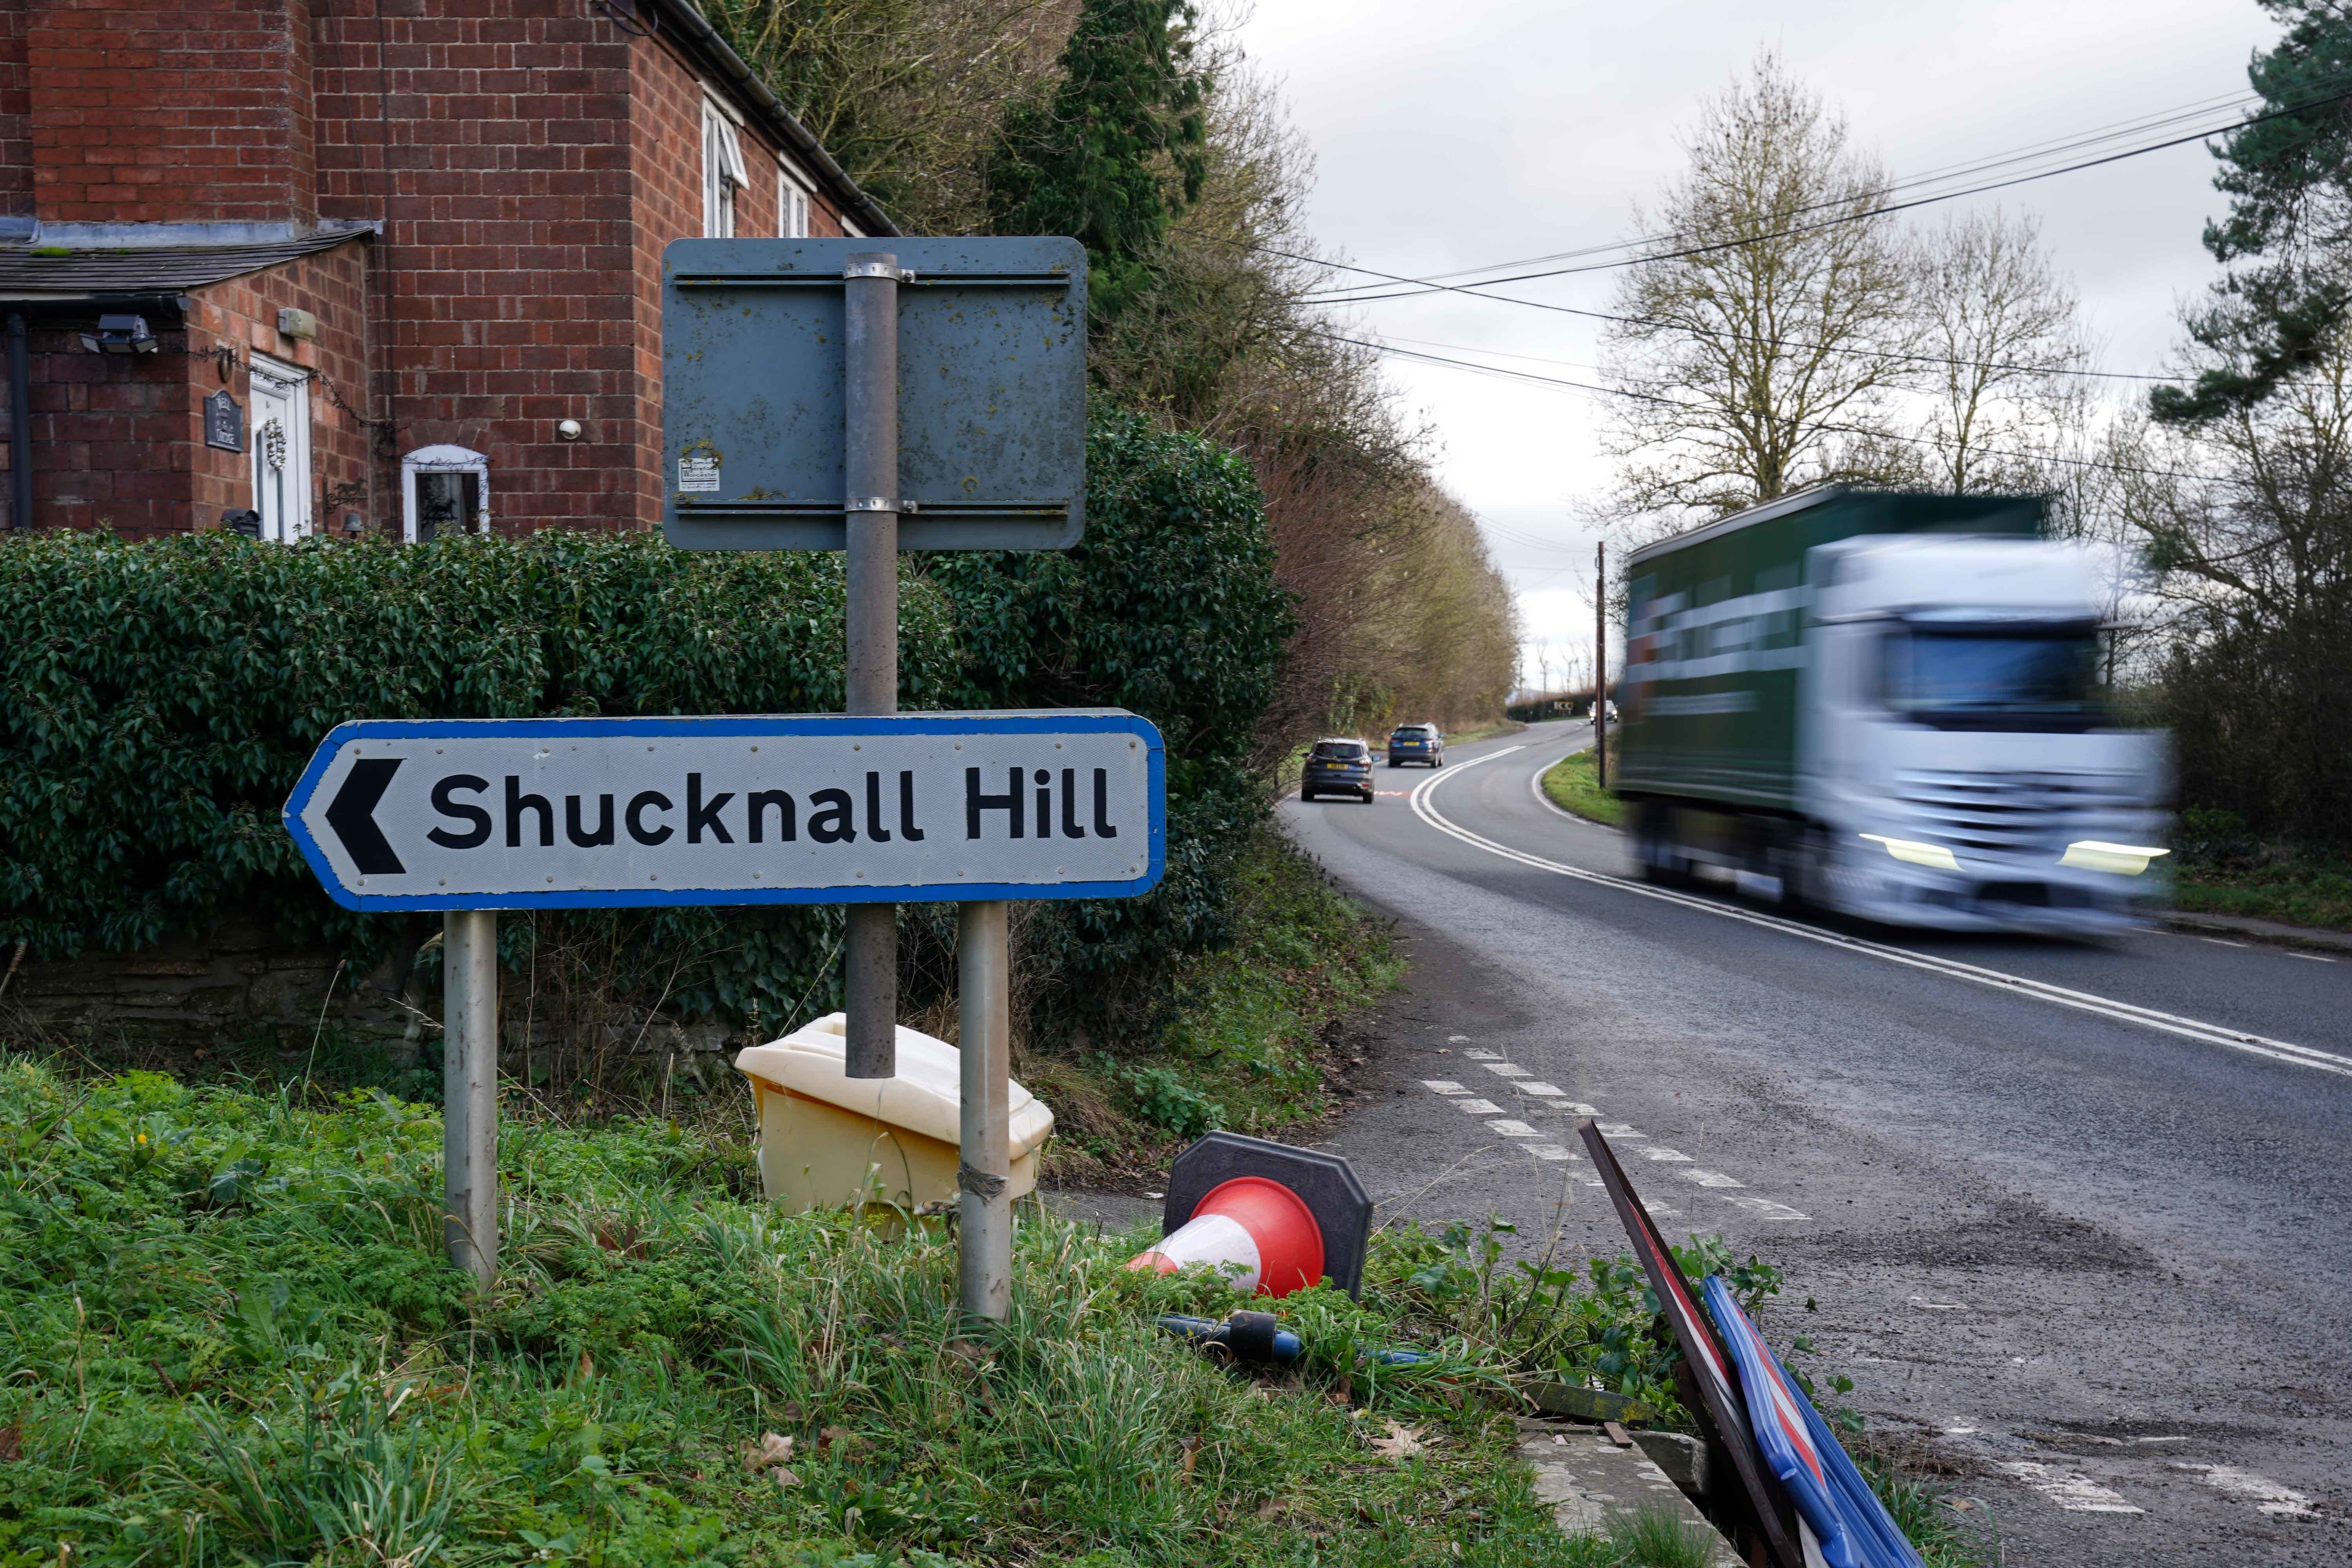 The crash occurred along the A4103 by Shucknall Hill, Herefordshire